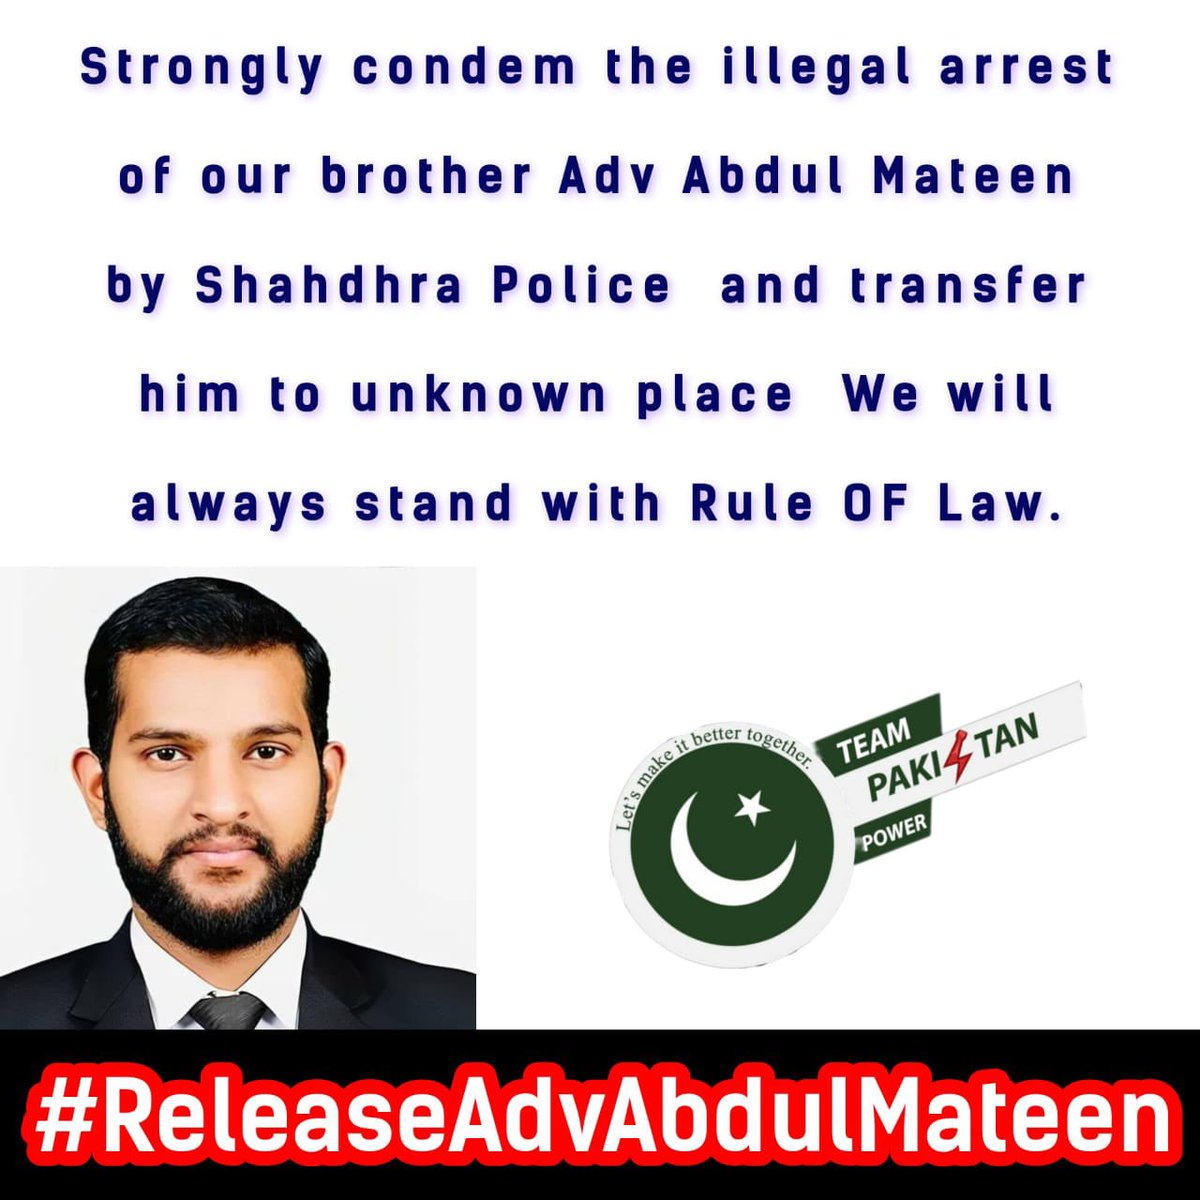 I.@tqb1468256.. wanna say that,if we dont stand up for Advocate Abdul Mateen today who will fight for us when we face similar injustices tomorrow? The time to speak out against oppression is now. @TeamPakPower #ReleaseAdvAbdulMateen